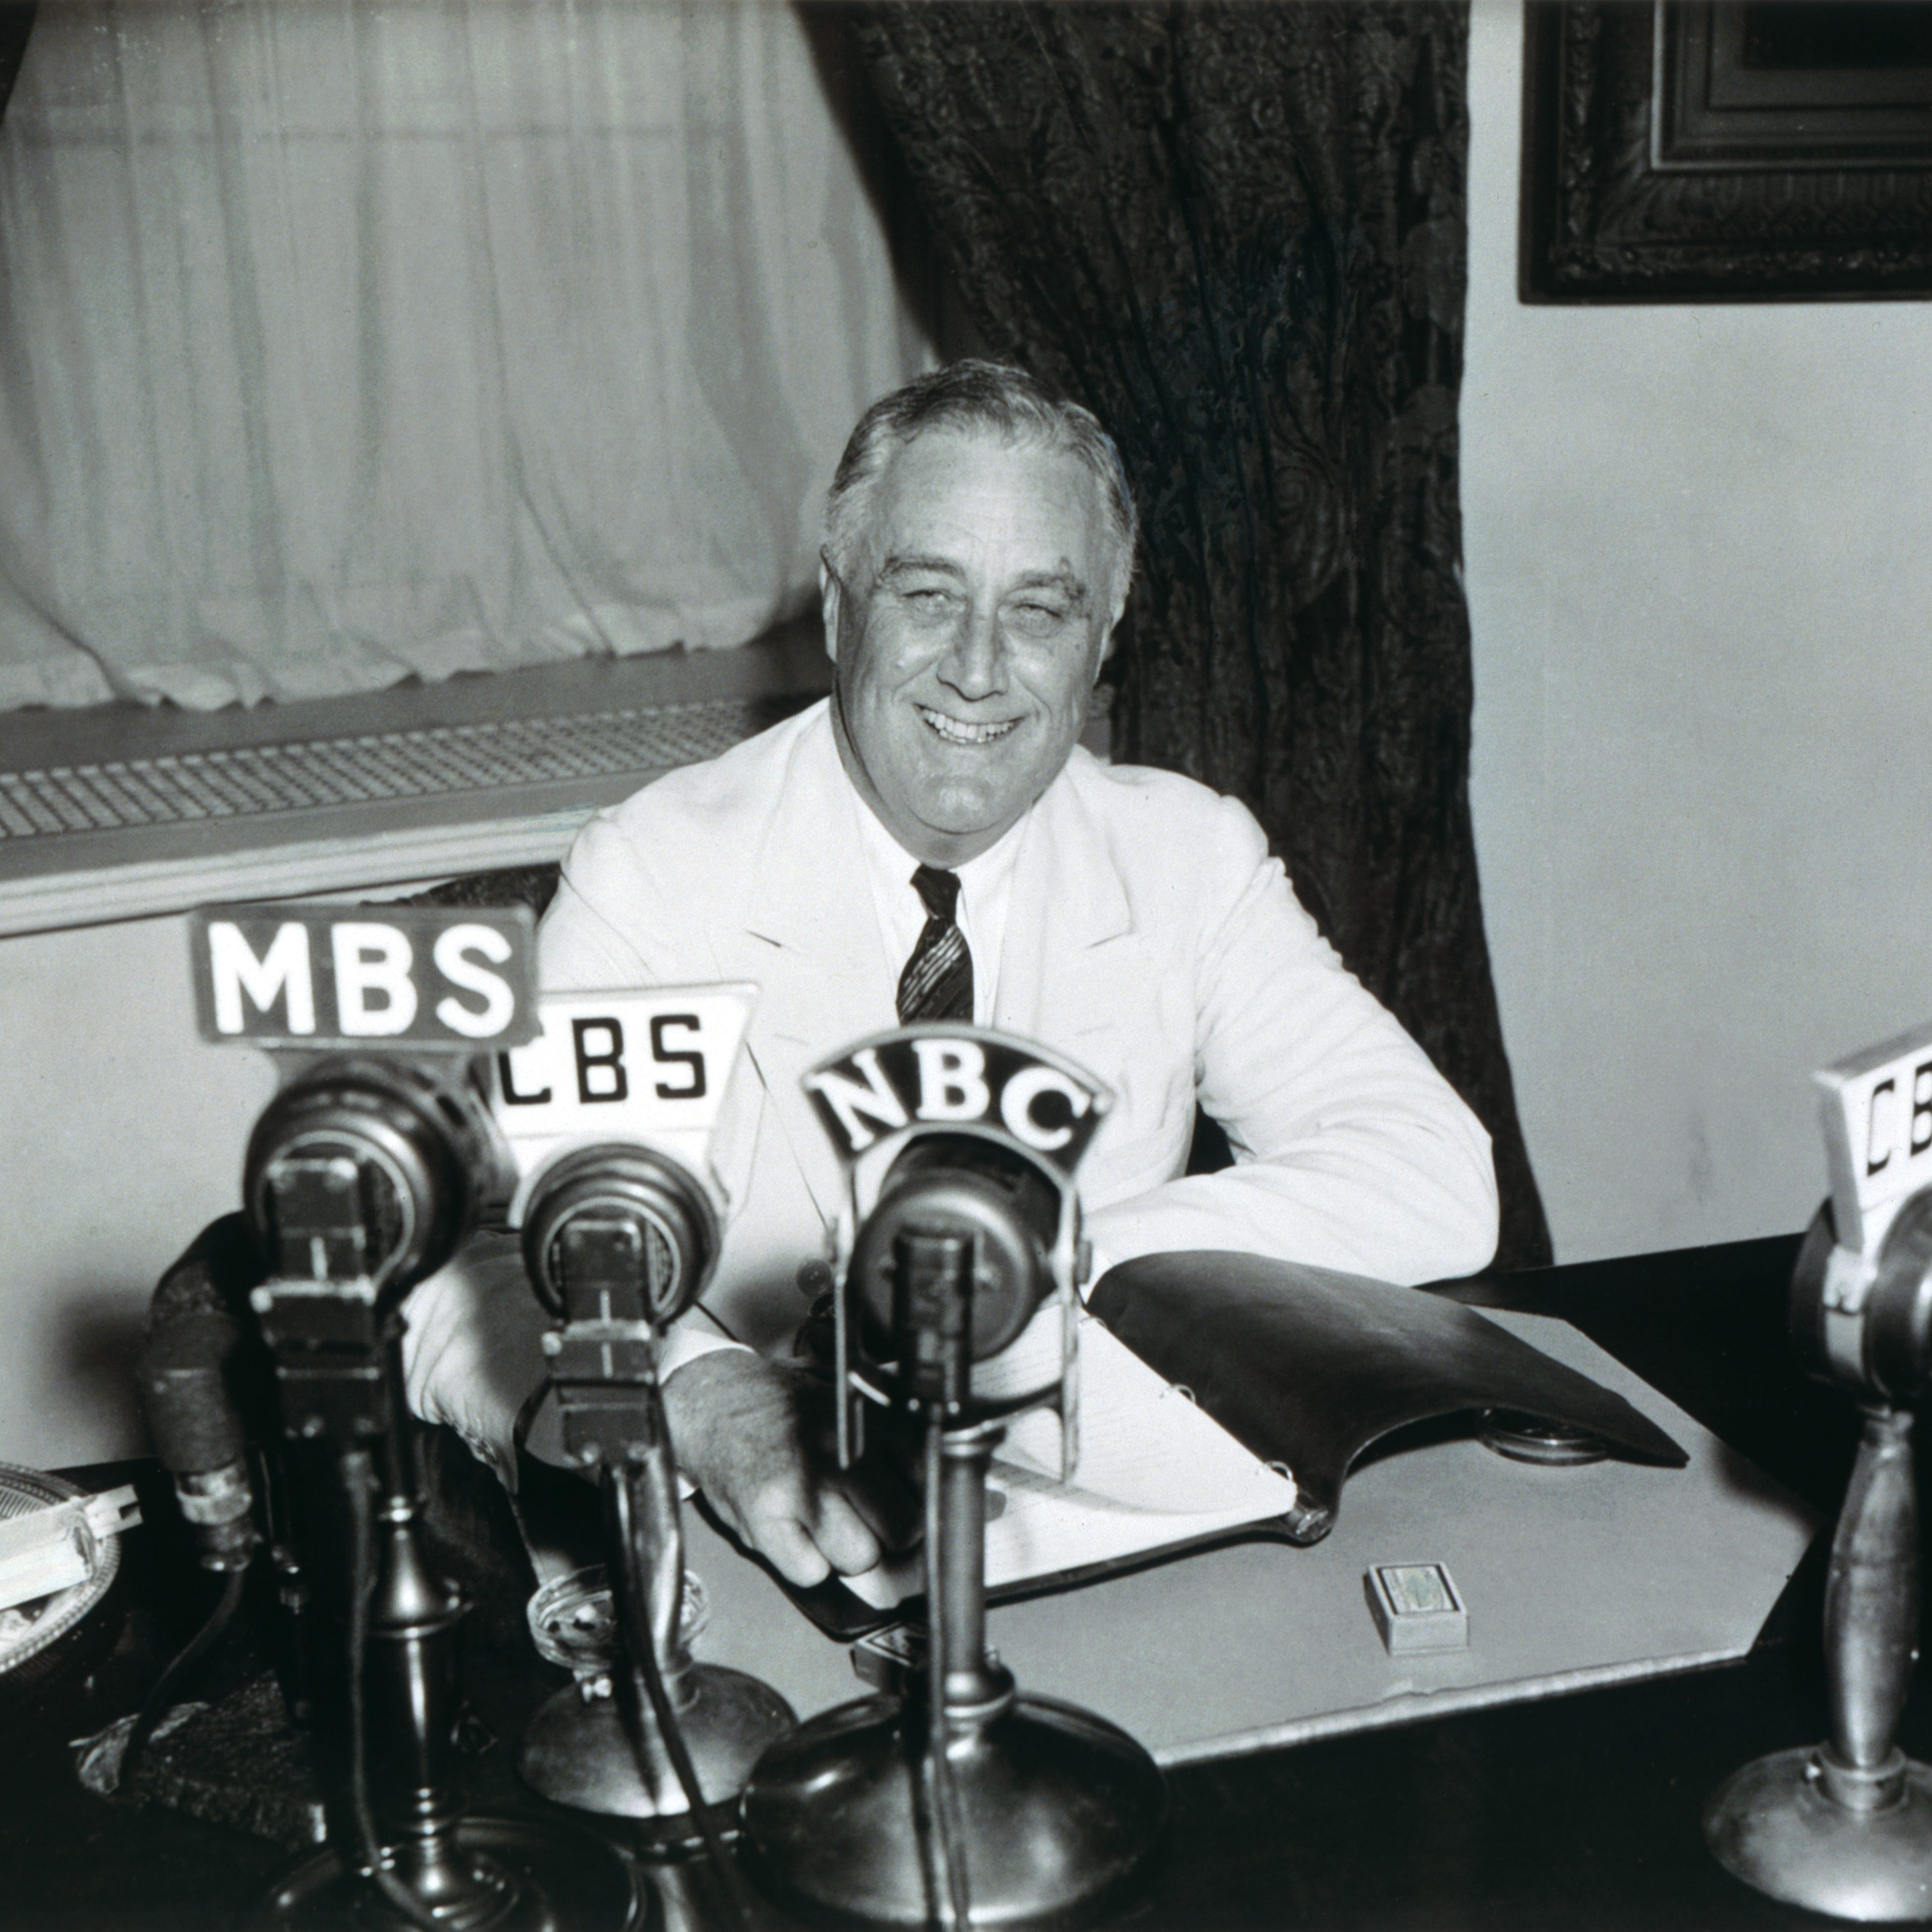 In this black and white photograph by Harris and Ewing, President Franklin D. Roosevelt delivers his 13th Fireside chat describing the accomplishments of the 75th Congress, progress that has been made relating to the Great Depression, and the upcoming 1938 elections.